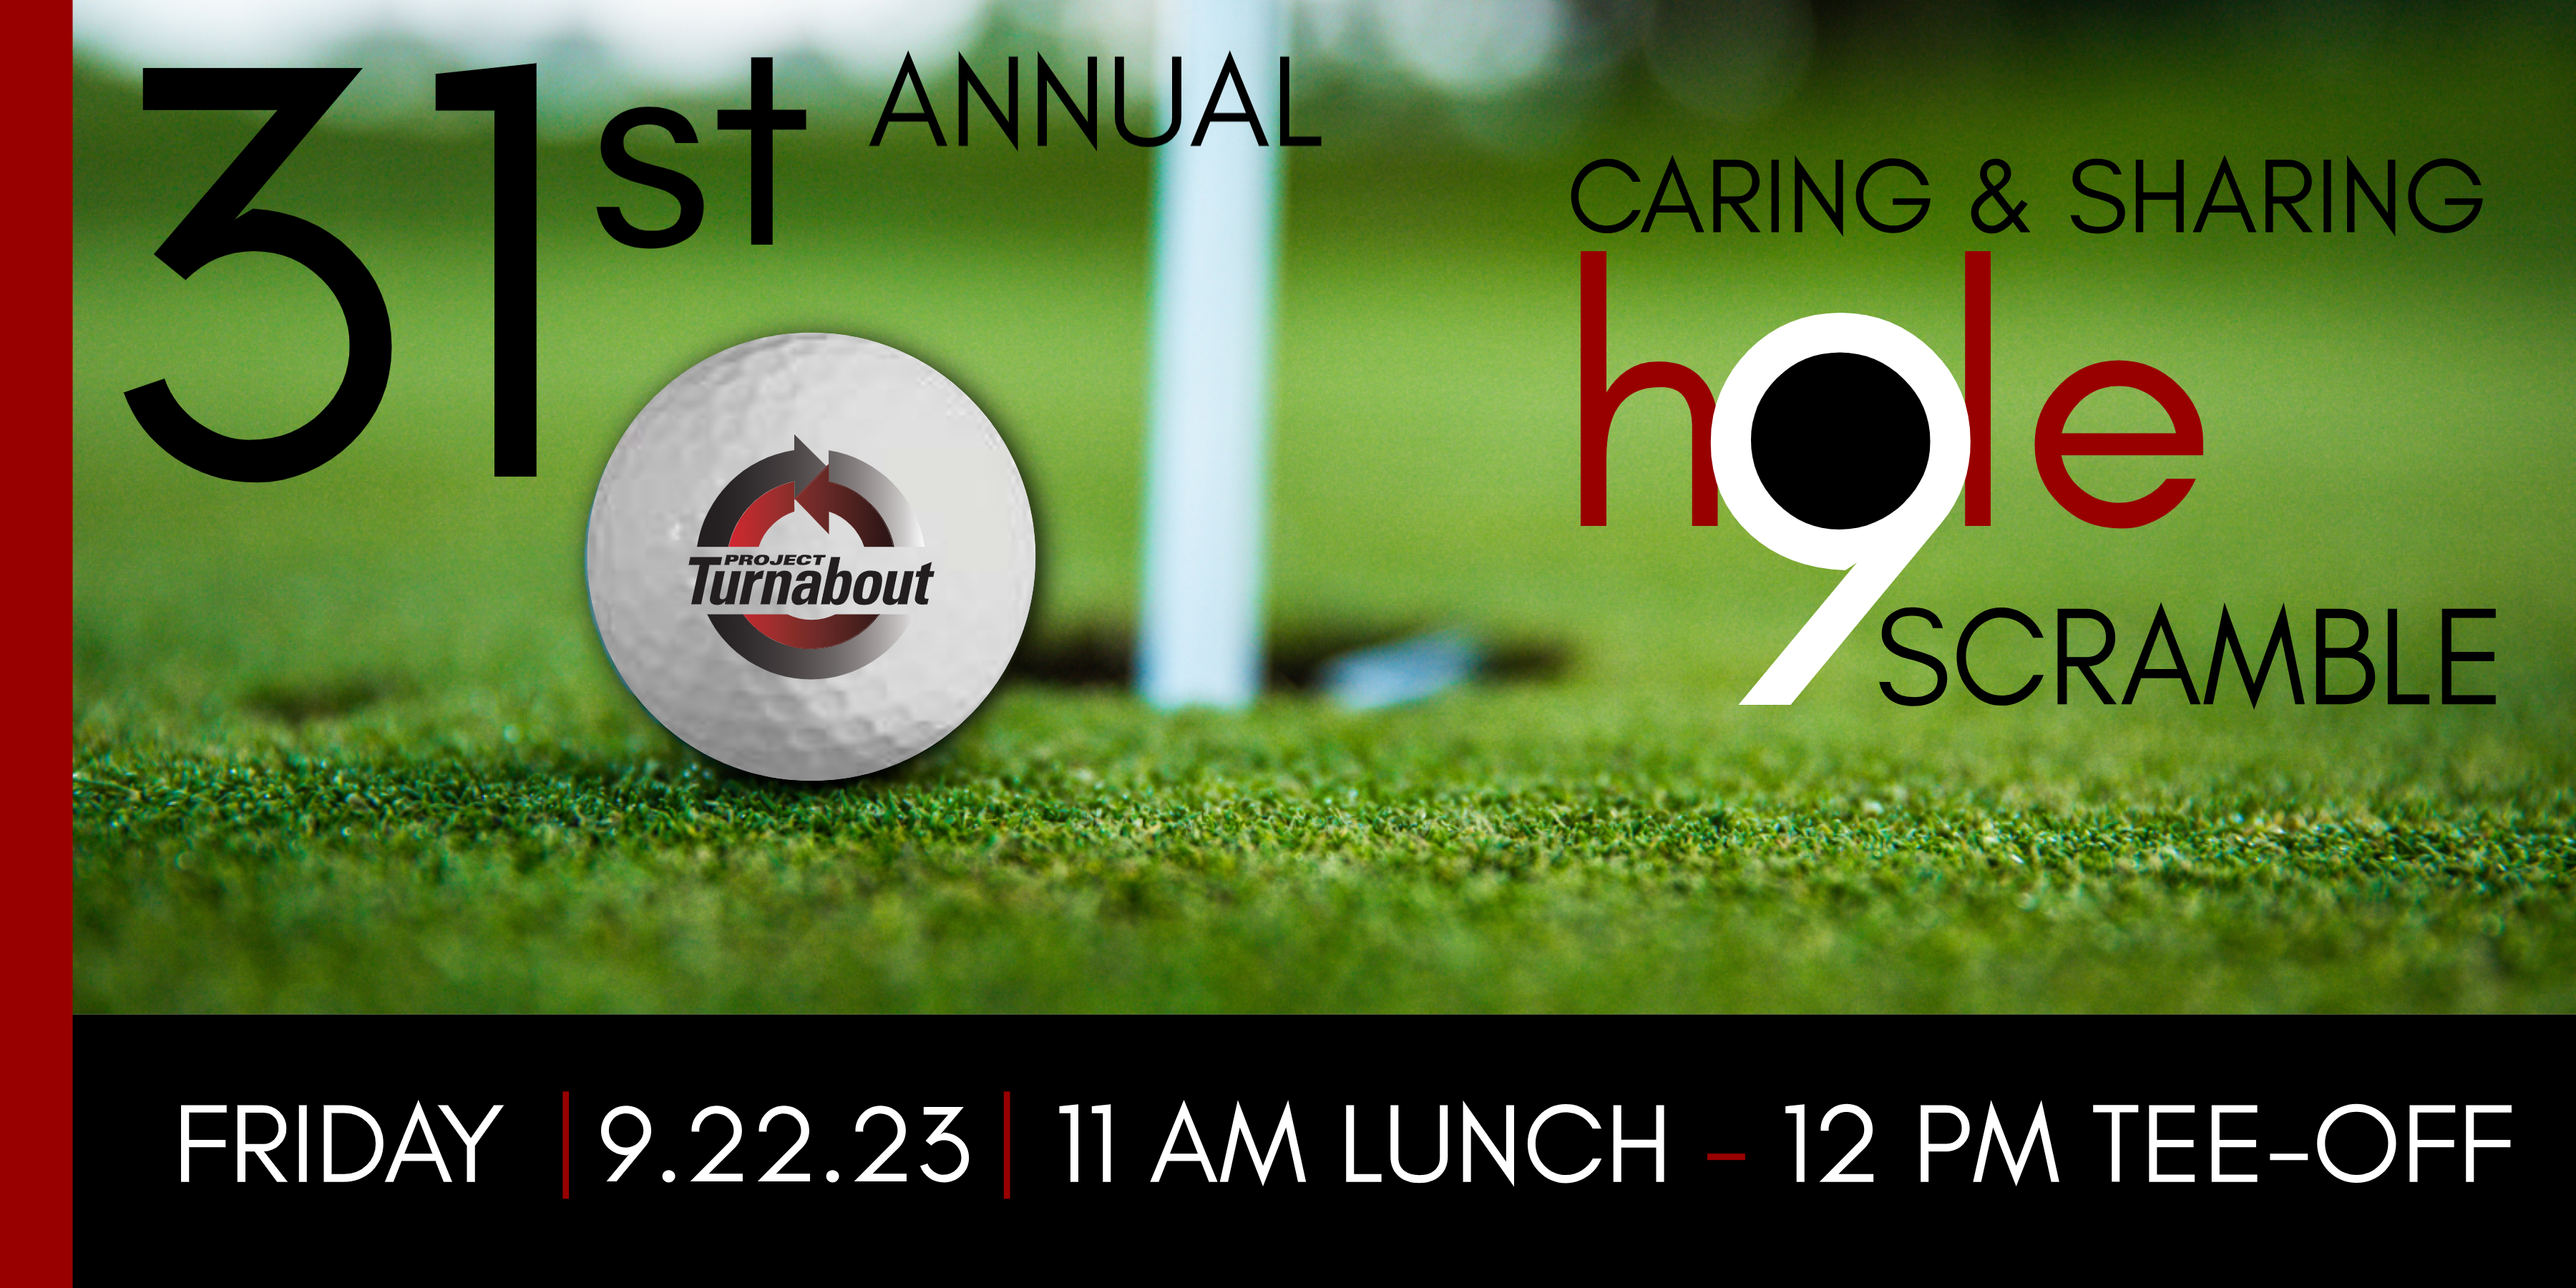 Project Turnabout 31st Annual Caring & Sharing Golf Scramble